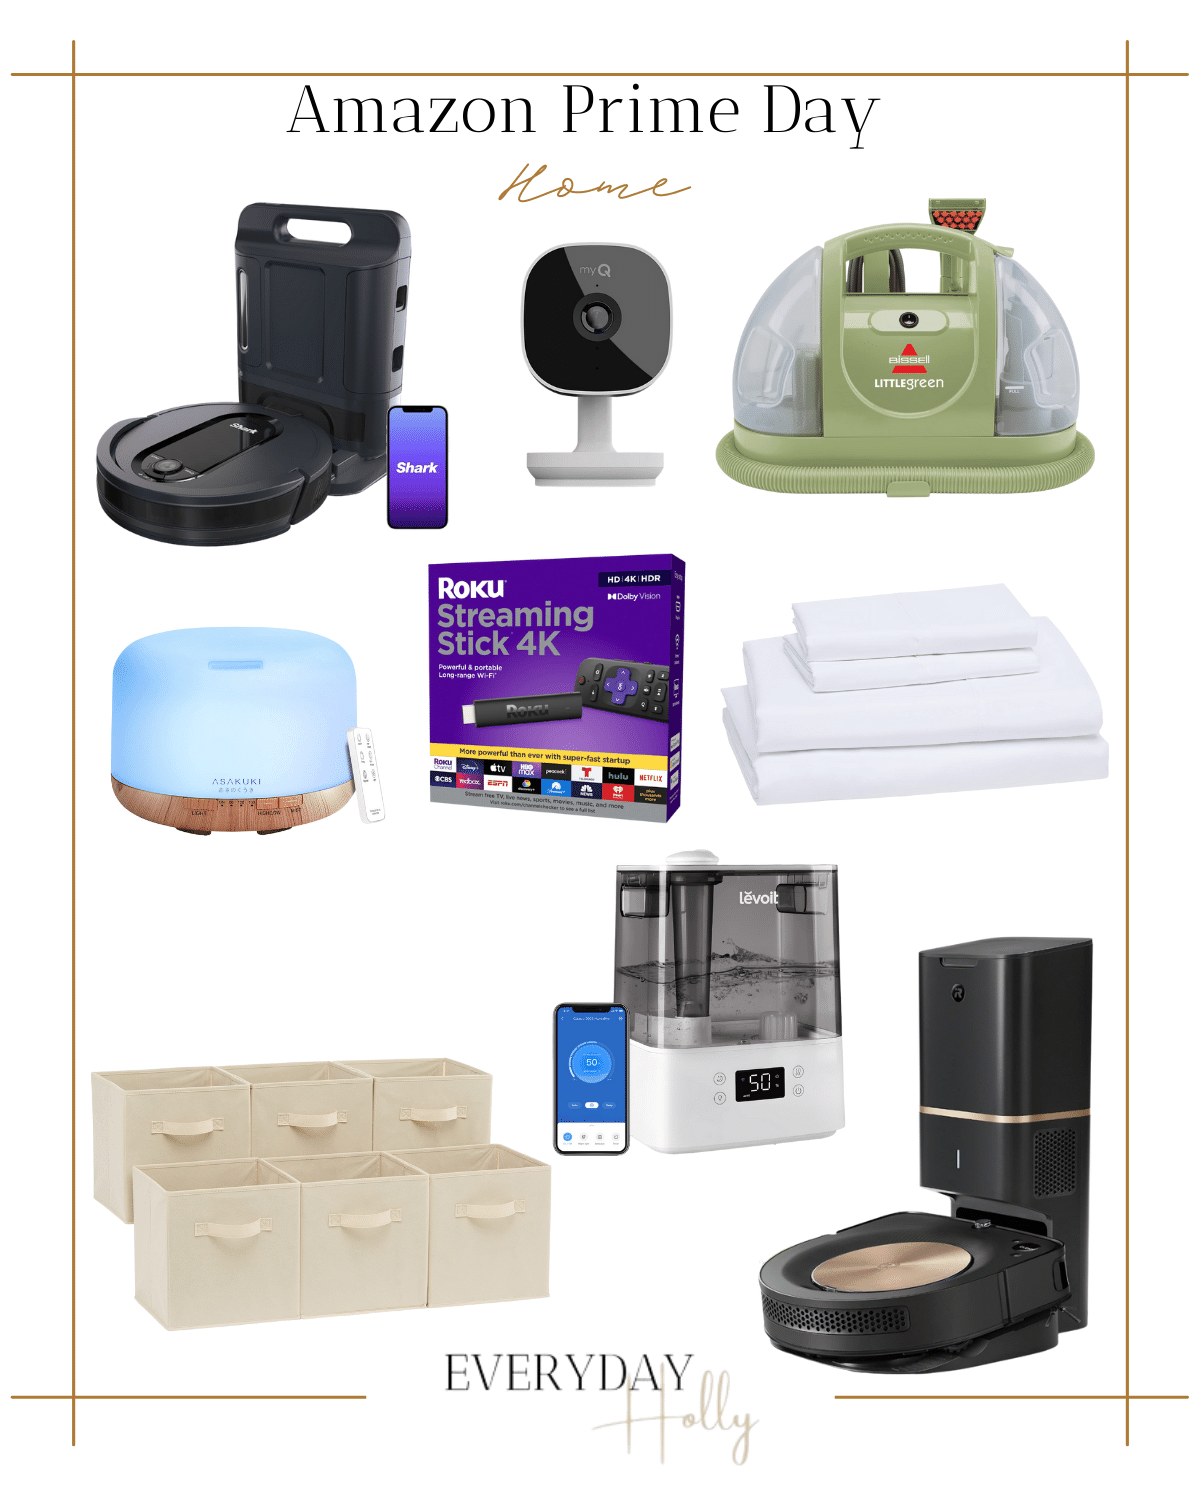 amazon home items, shark robot vacuum, smart garage camera, bissell carpet cleaner, oil diffuser, roku streaming stick, white bed sheets, foldable storage clothing bins, humidifier, 